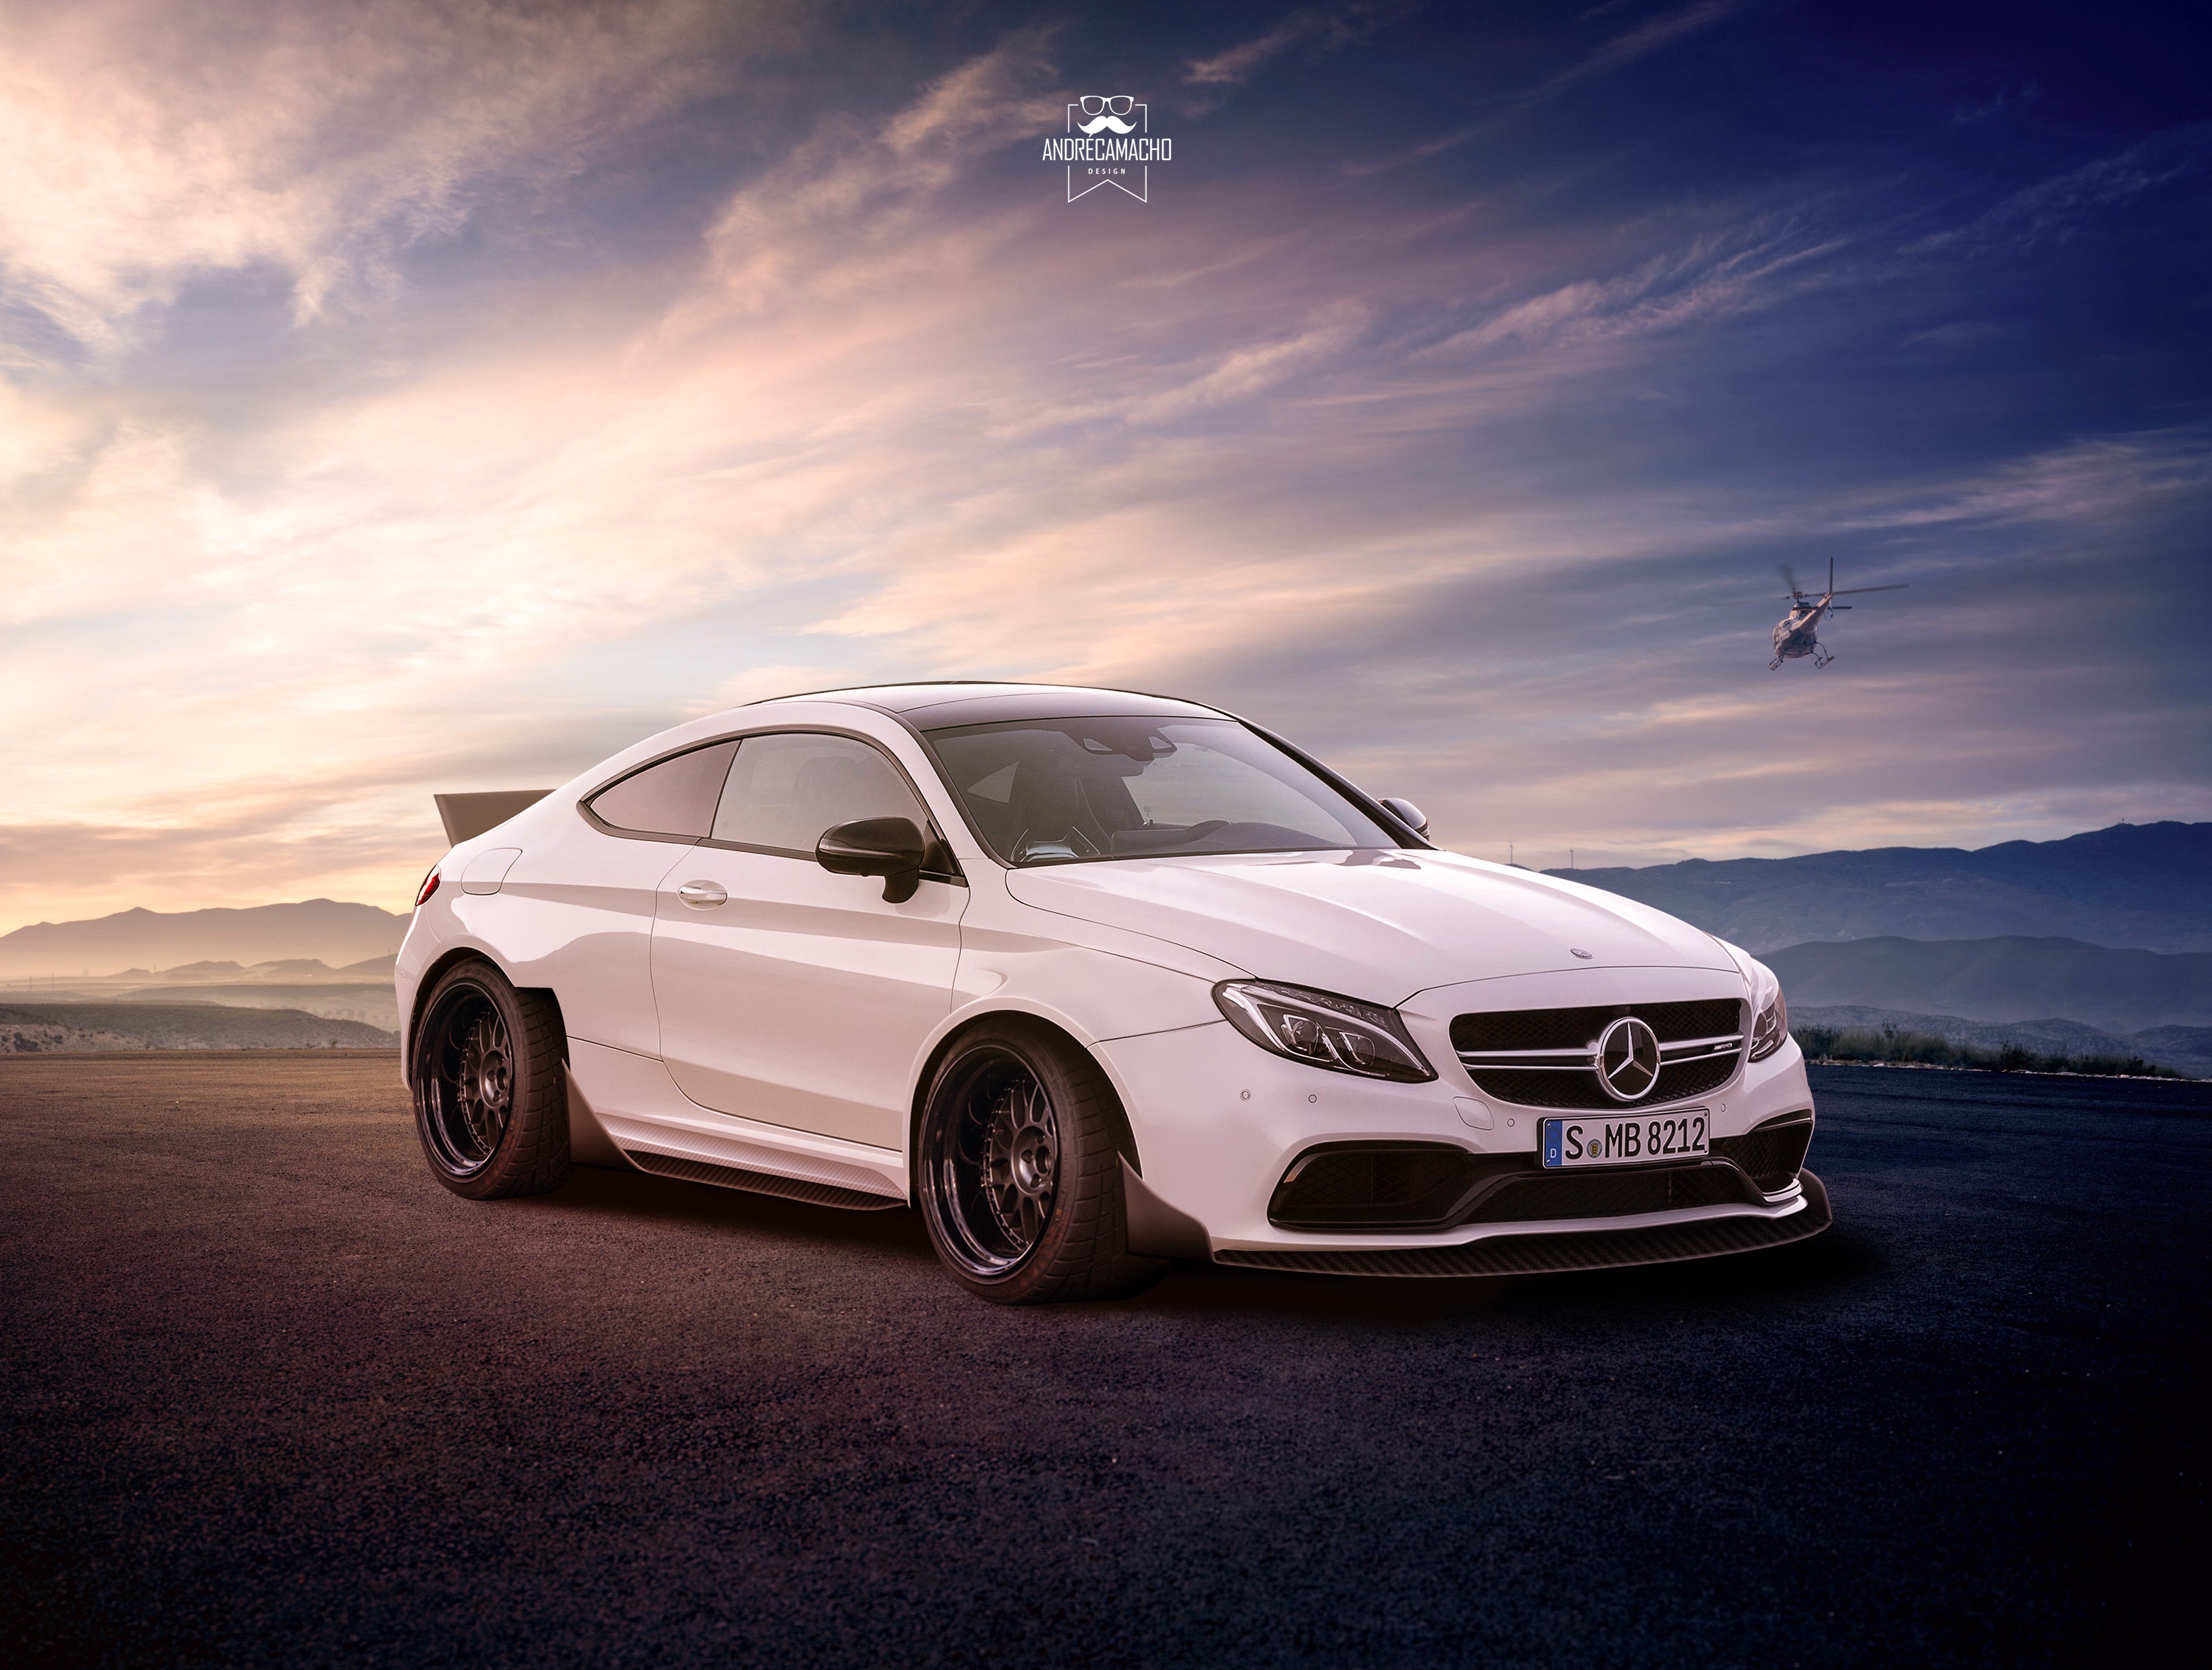 General 3805x2872 Mercedes-Benz C63 AMG vehicle numbers white cars sky helicopters clouds Mercedes-Benz